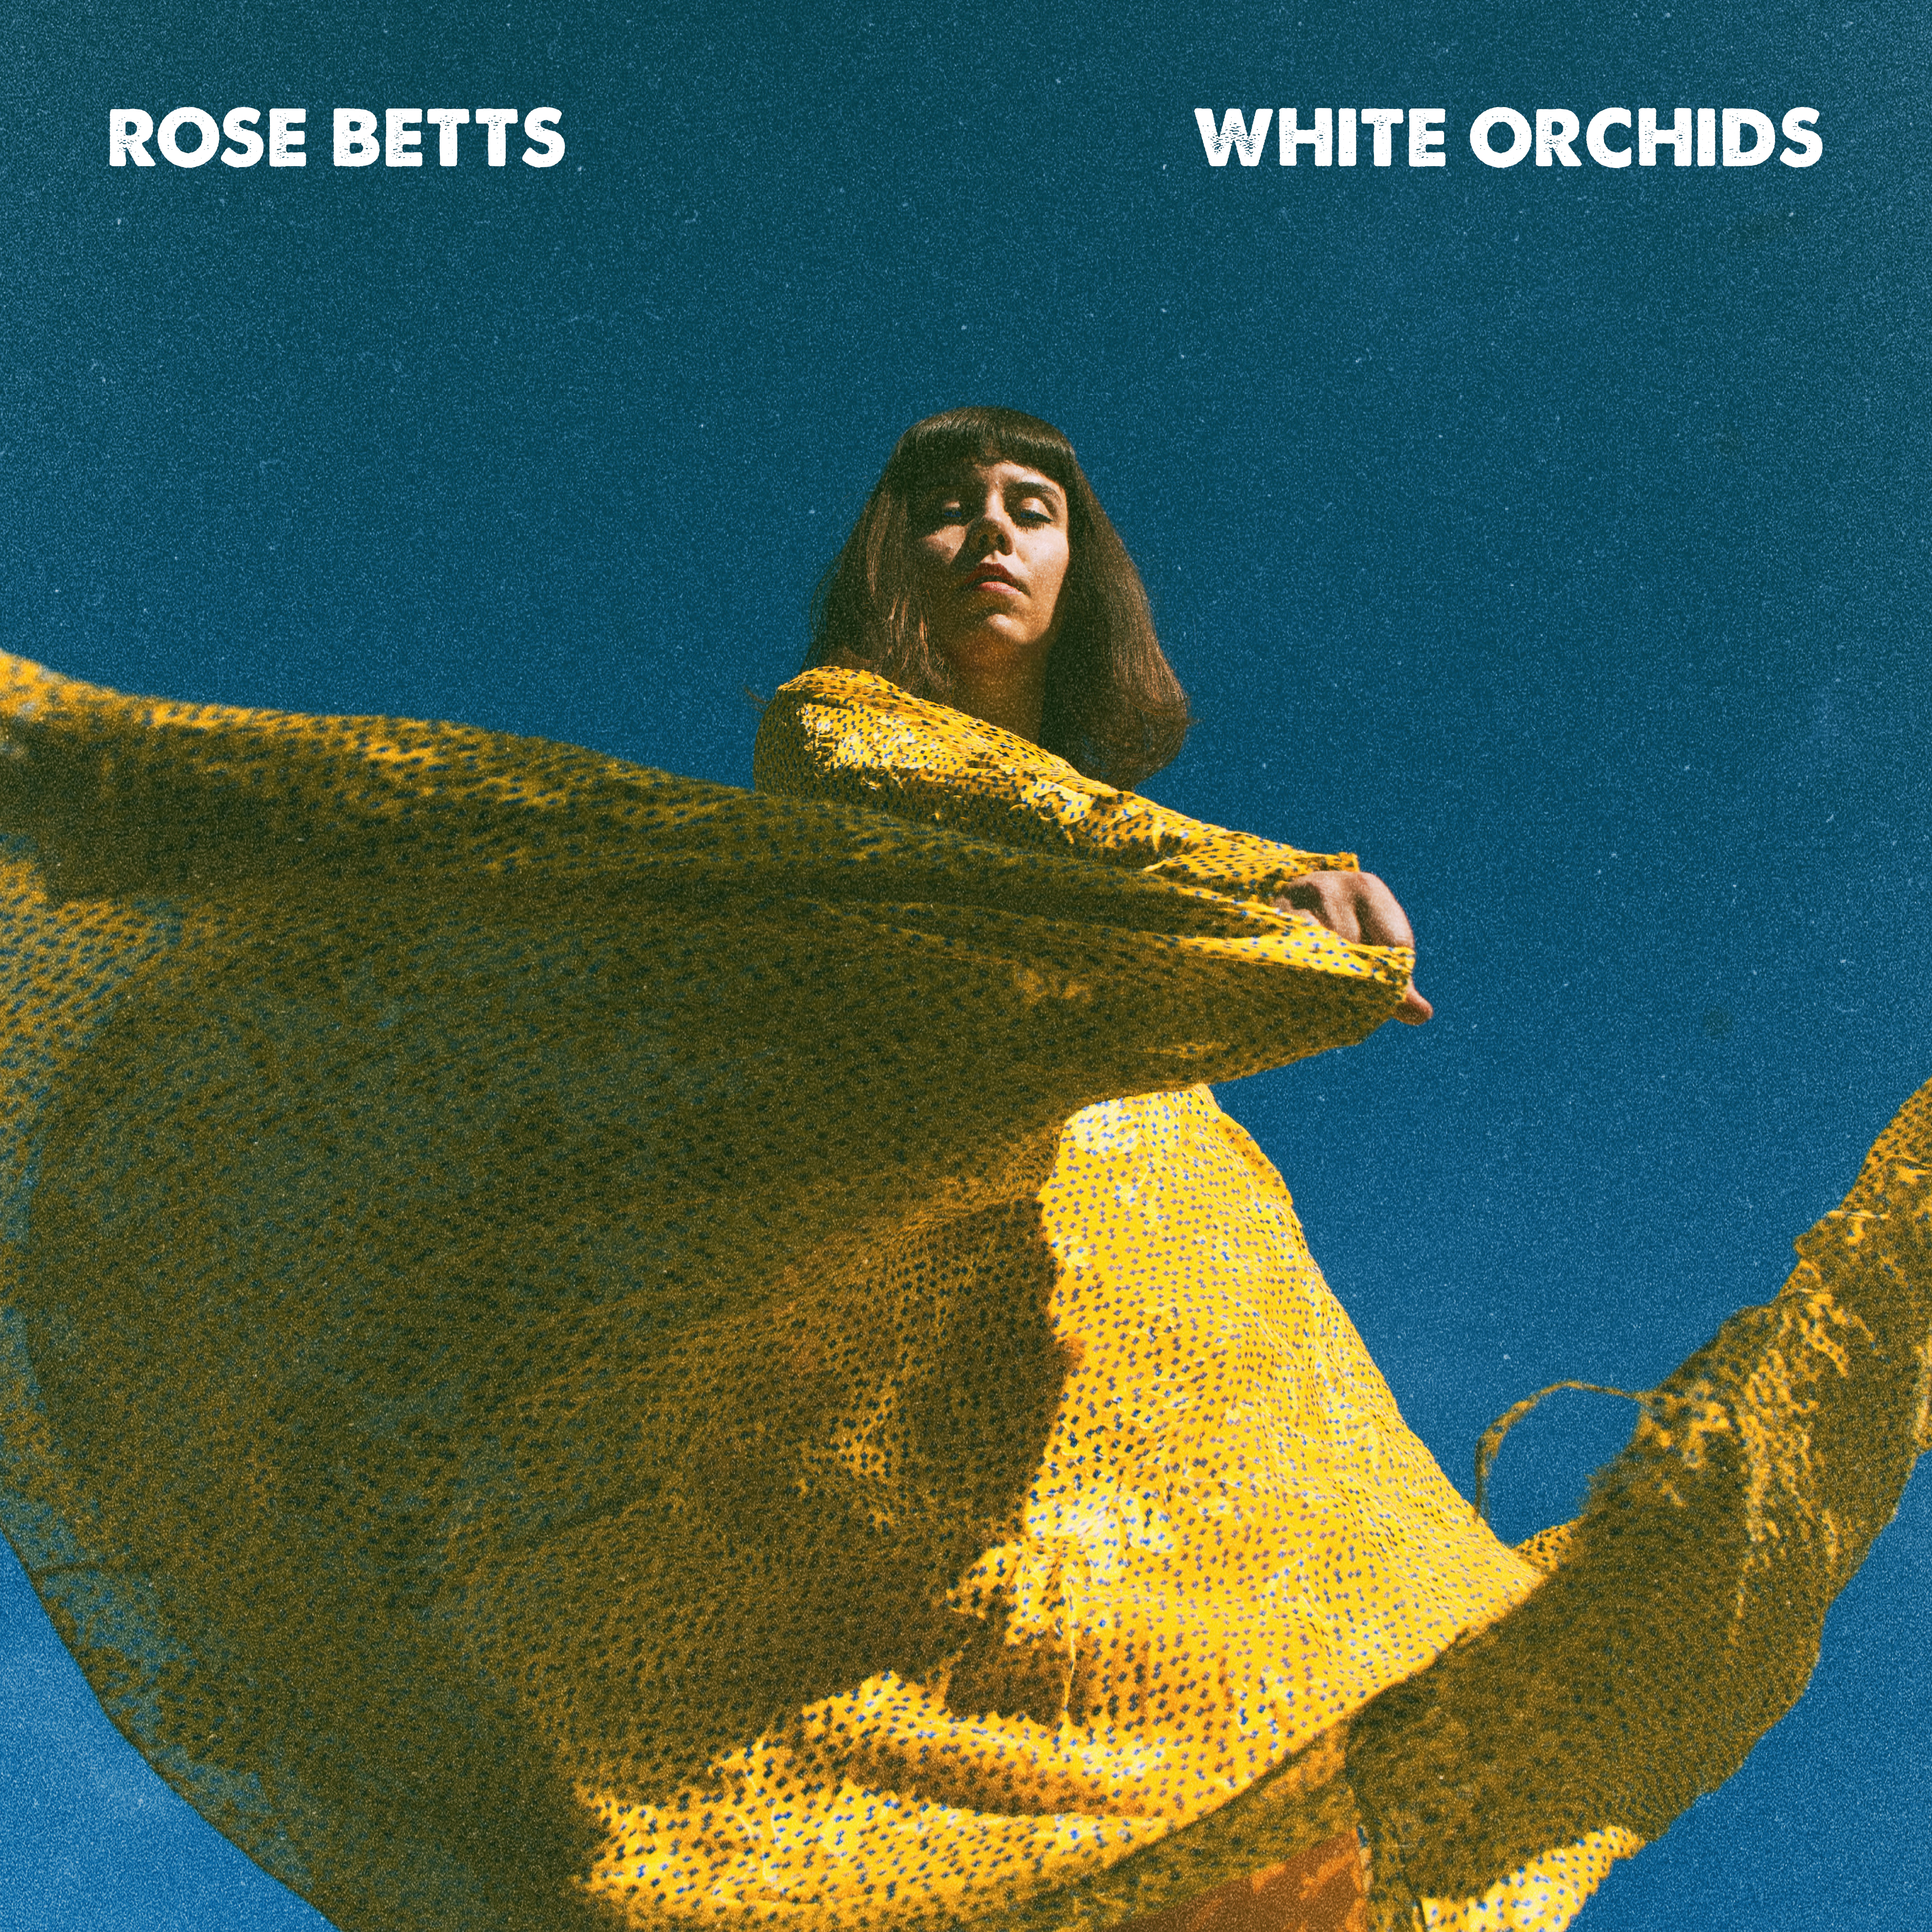 LA-Based Singer Rose Betts On Songwriting, Sinatra, And Her Debut New Album “White Orchids”